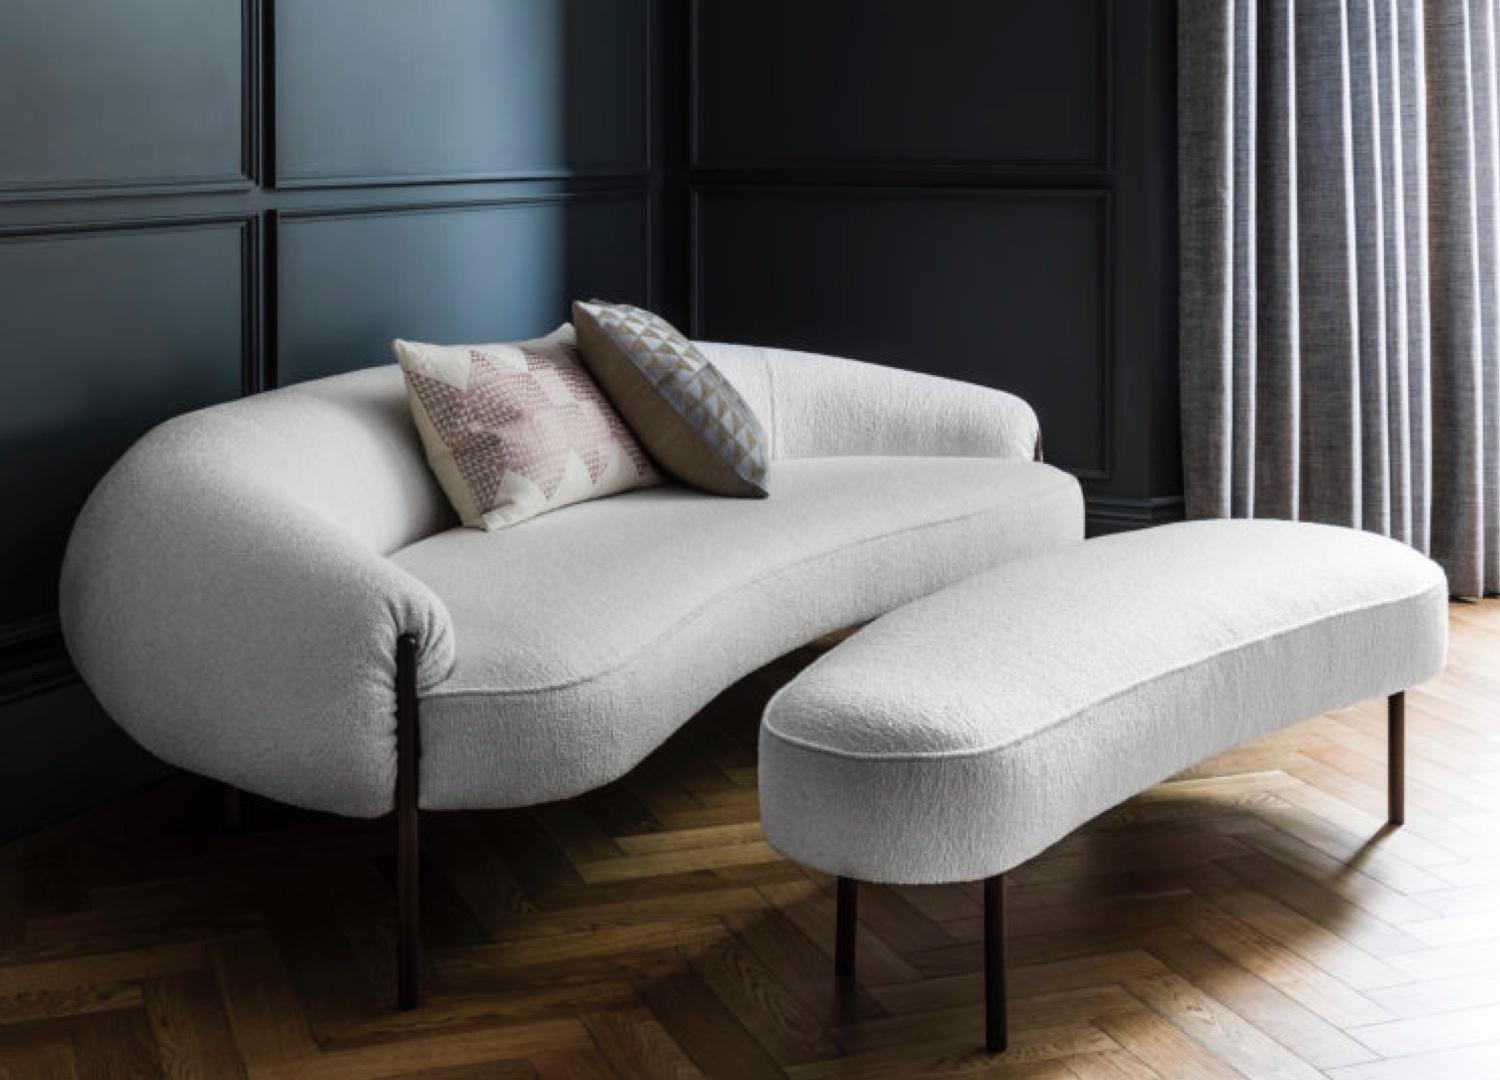 Contemporary Ottoman 'Isola' by Amura Lab 
Designer: Lucy Kurrein

Model shown: Textile - Ortisei 01

Dimensions : 
- Ottoman : H. 45 x W. 154 x D. 57 cm

“Isola: icon of the future” Isola is a statement of intent, a design collection comprising